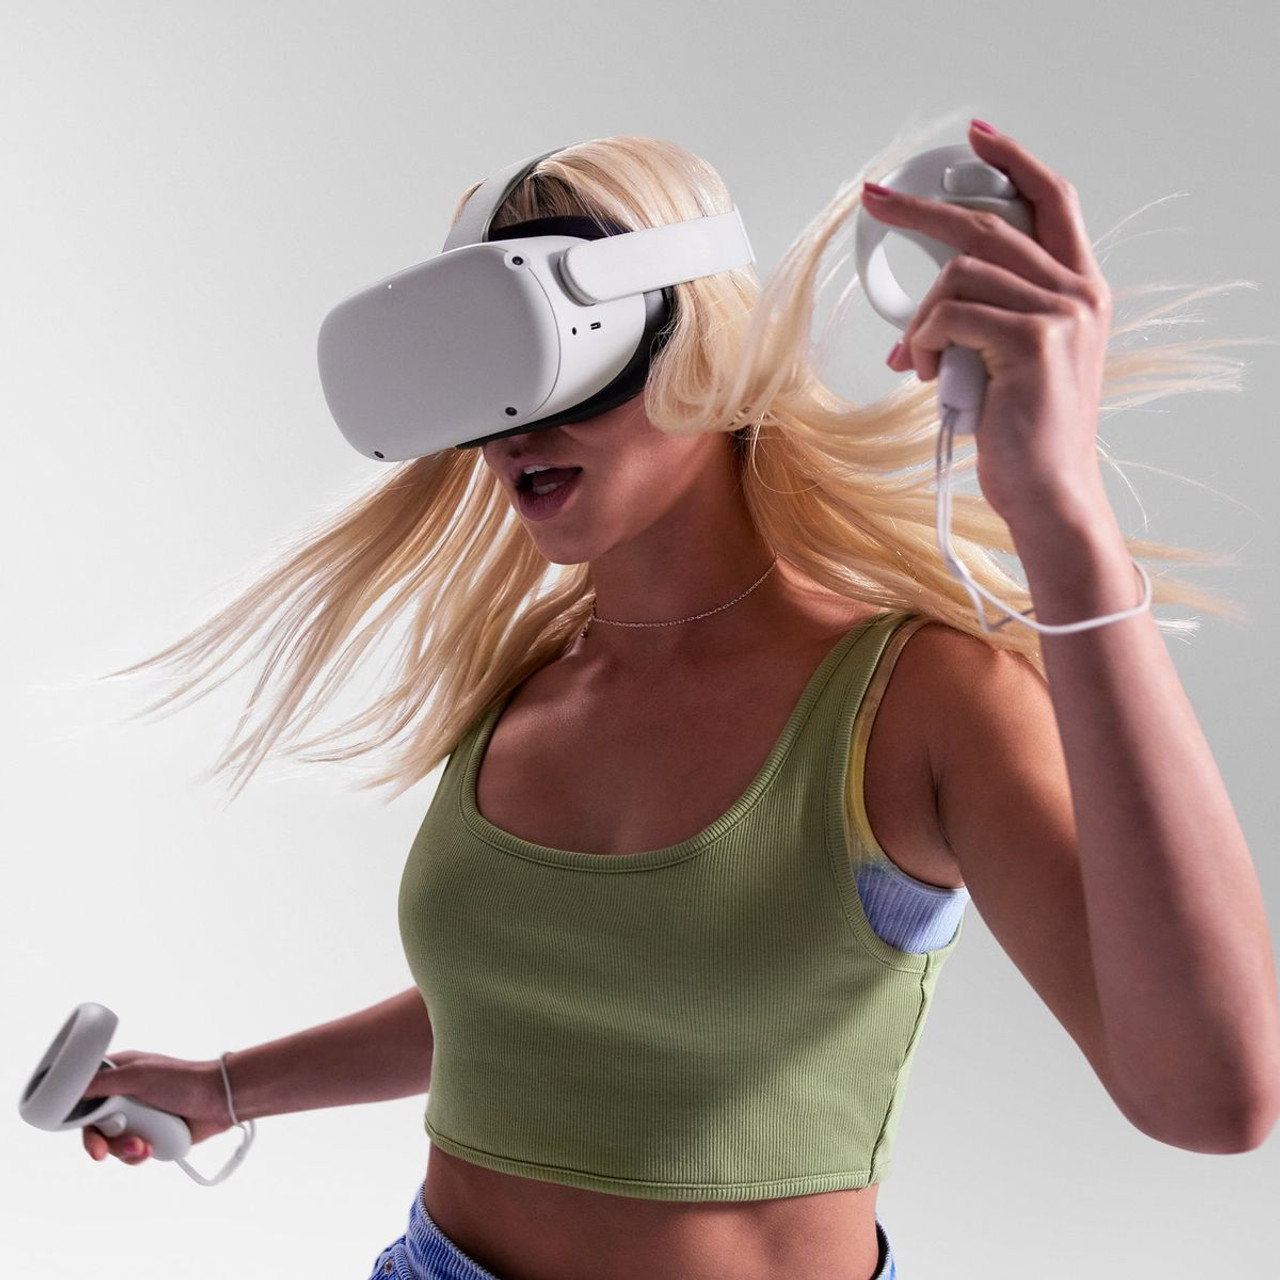 Meta Quest 2 - Advanced All-In-One Virtual Reality Headset product image